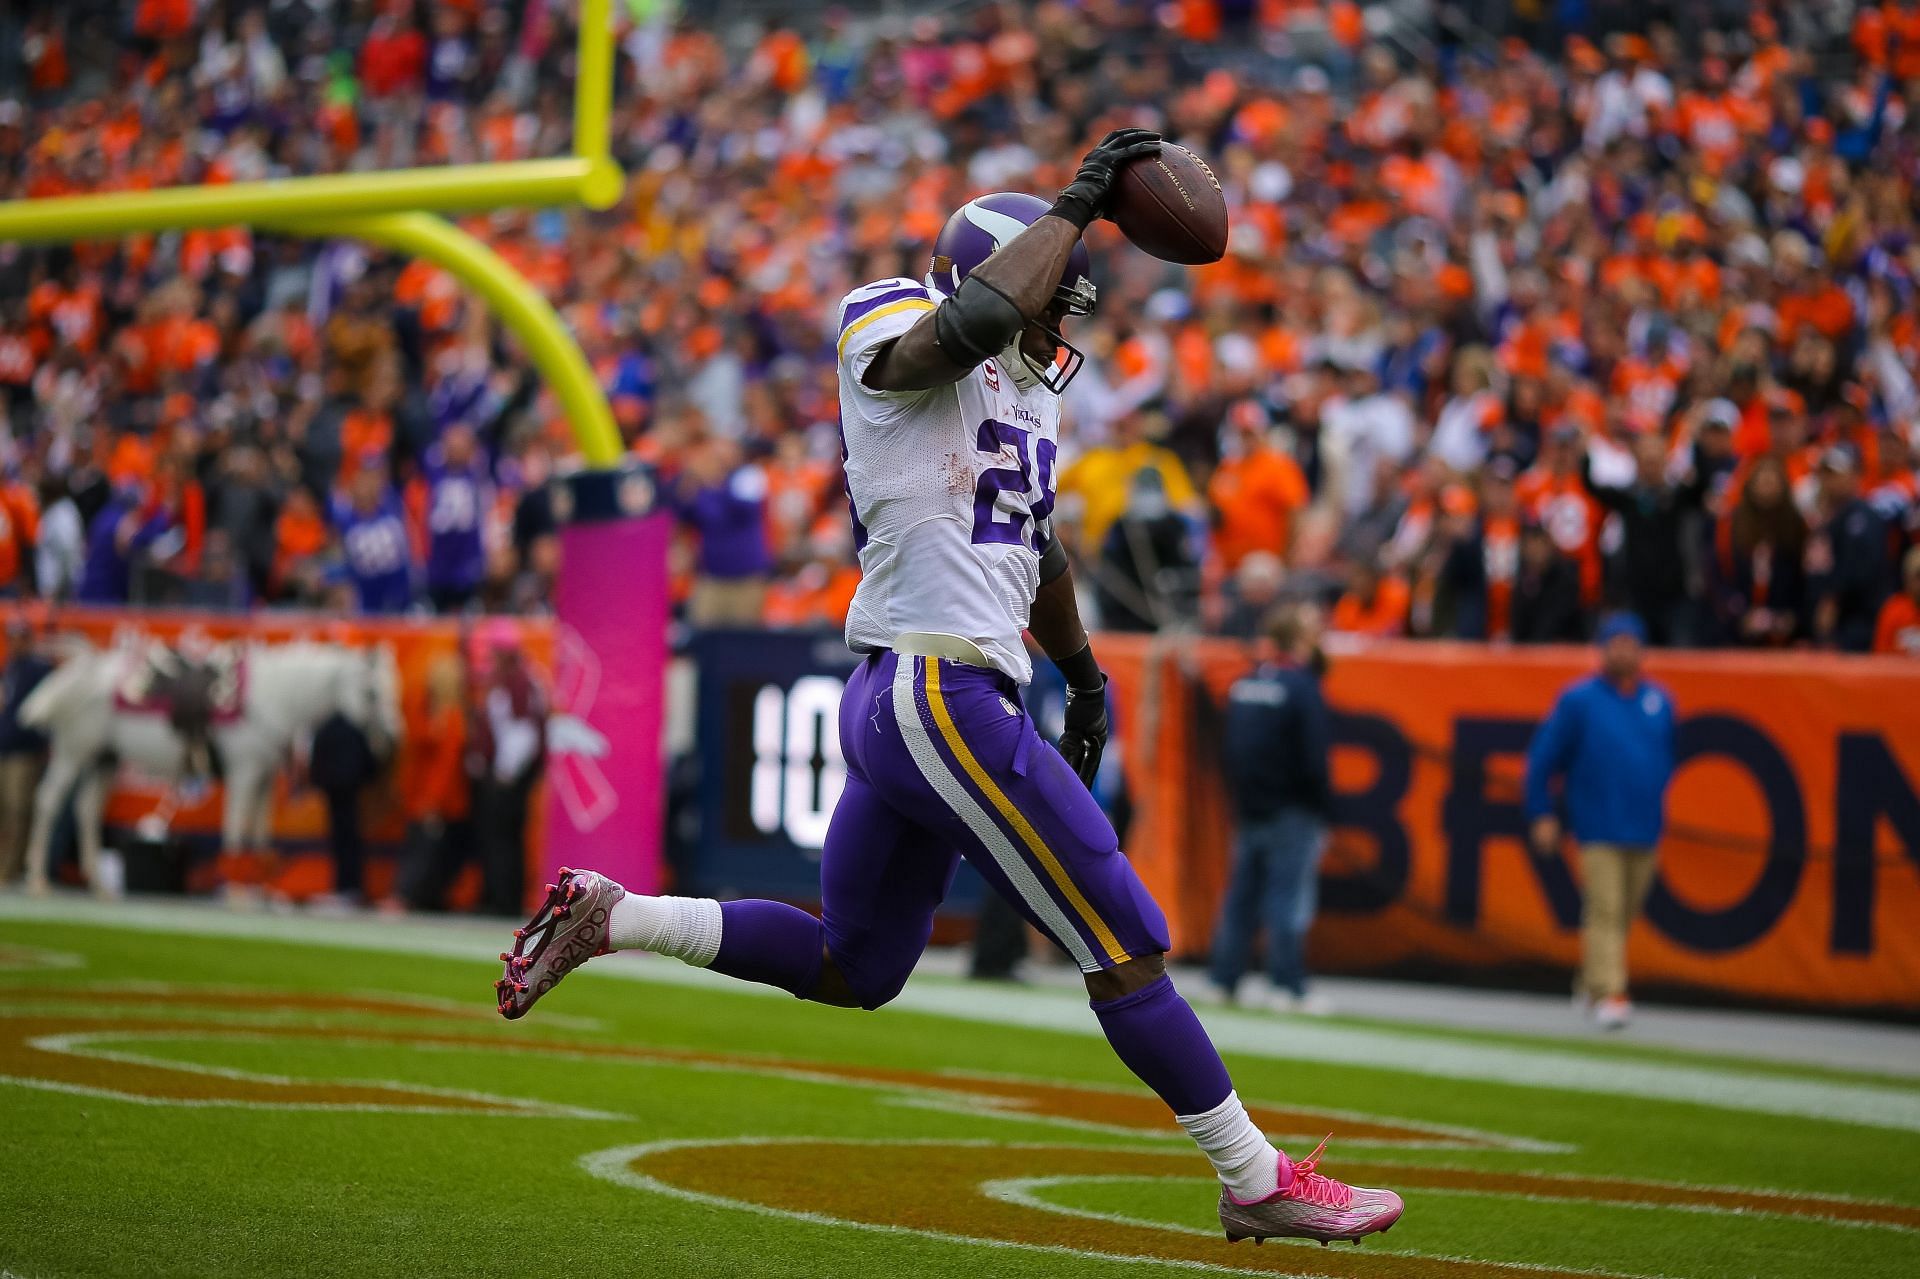 Adrian Peterson #28 of the Minnesota Vikings celebrates after rushing for a 48 yard touchdown against the Denver Broncos